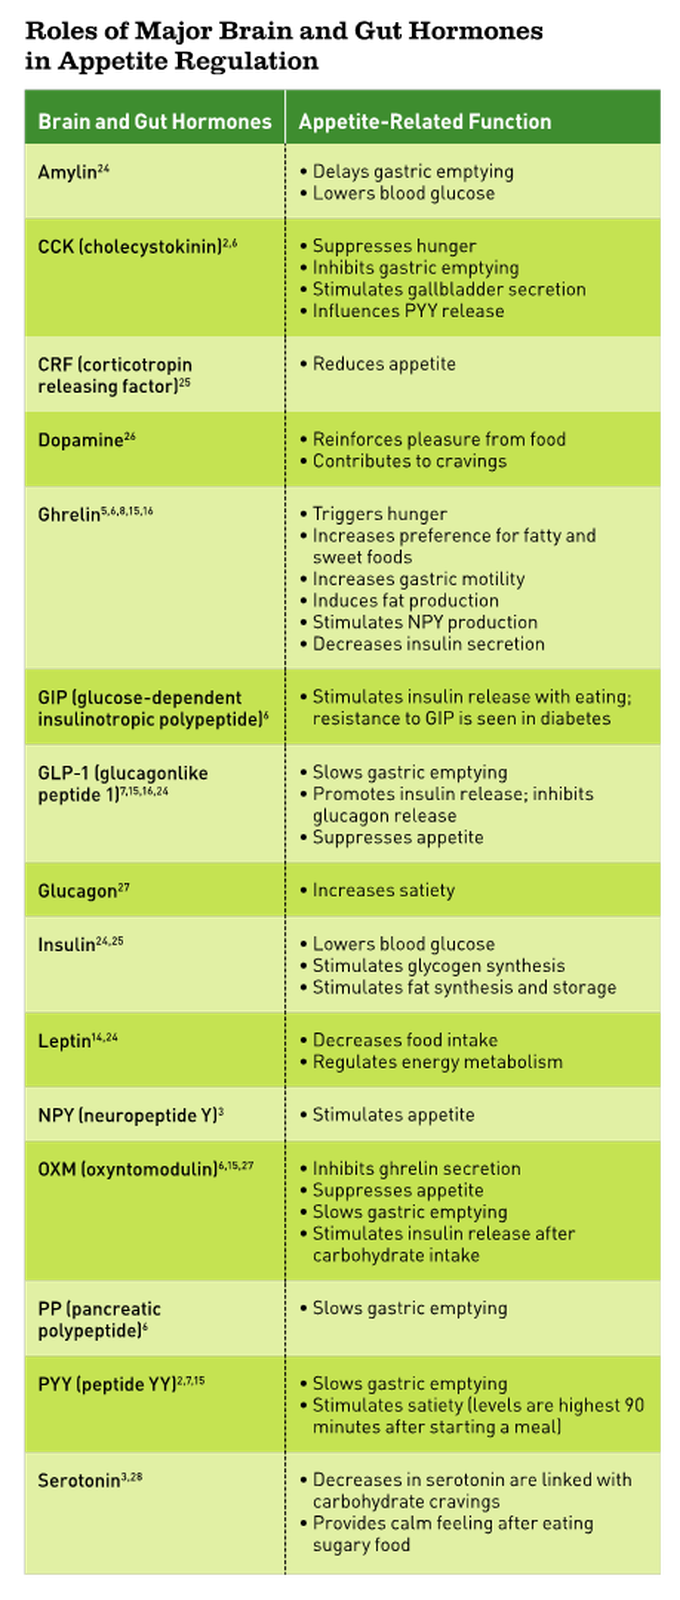 Brain and Gut hormone in appetite regulation